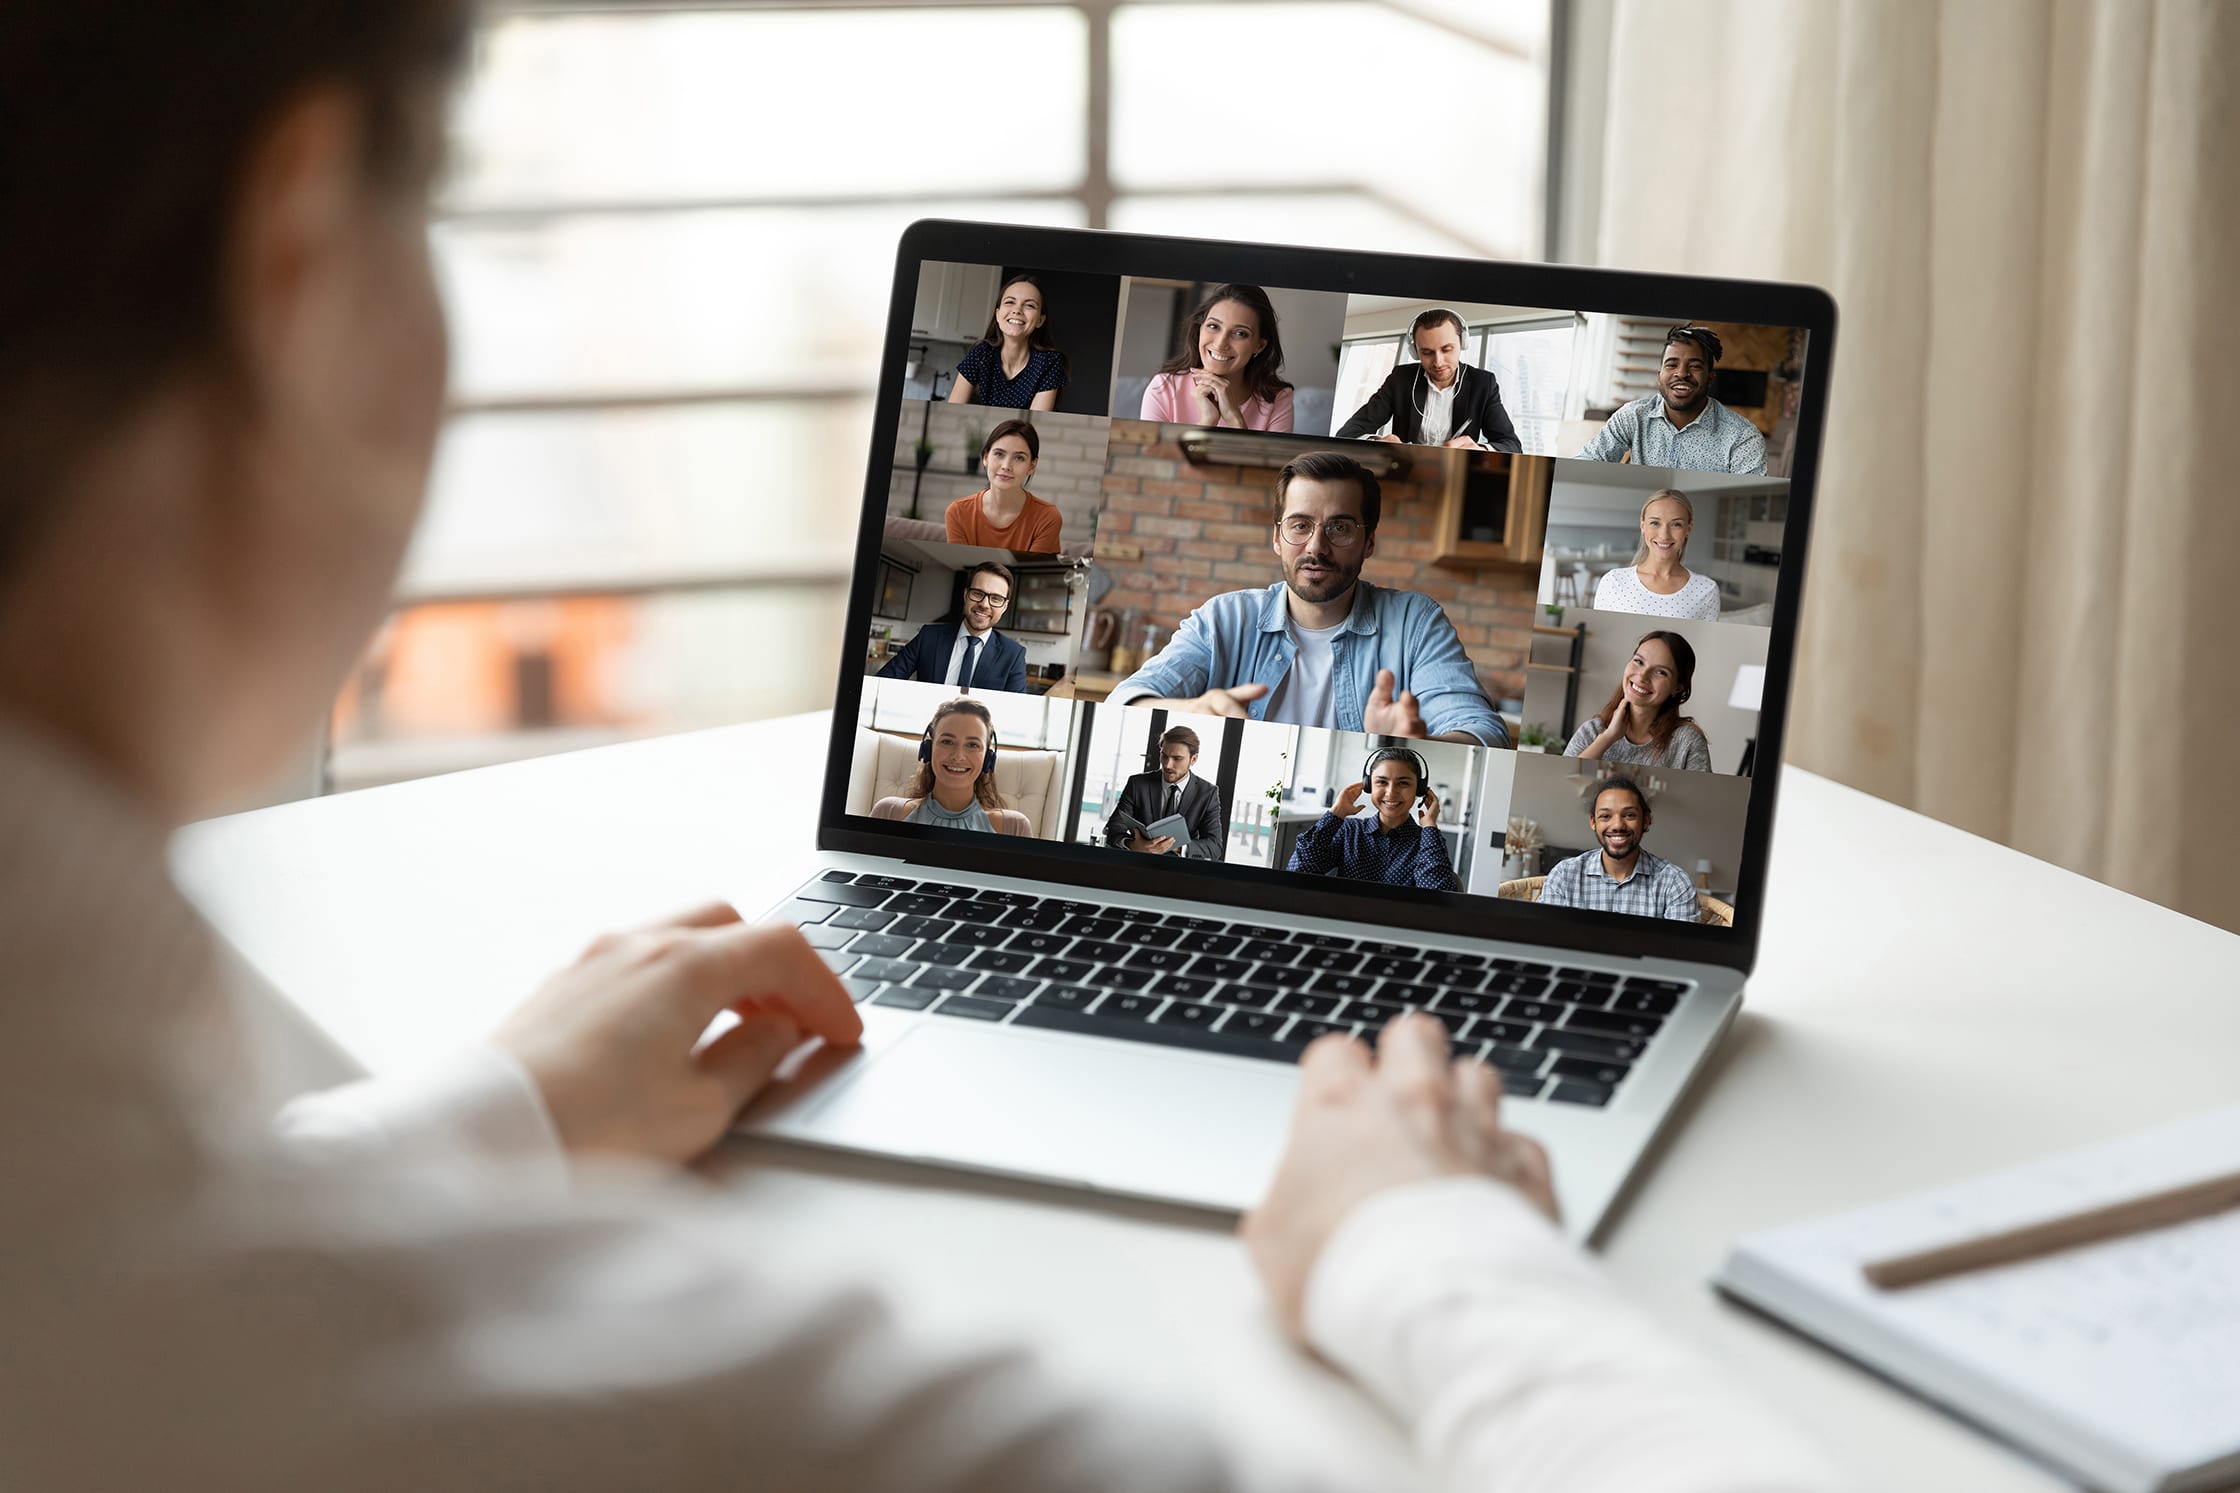 Group of people on a video call